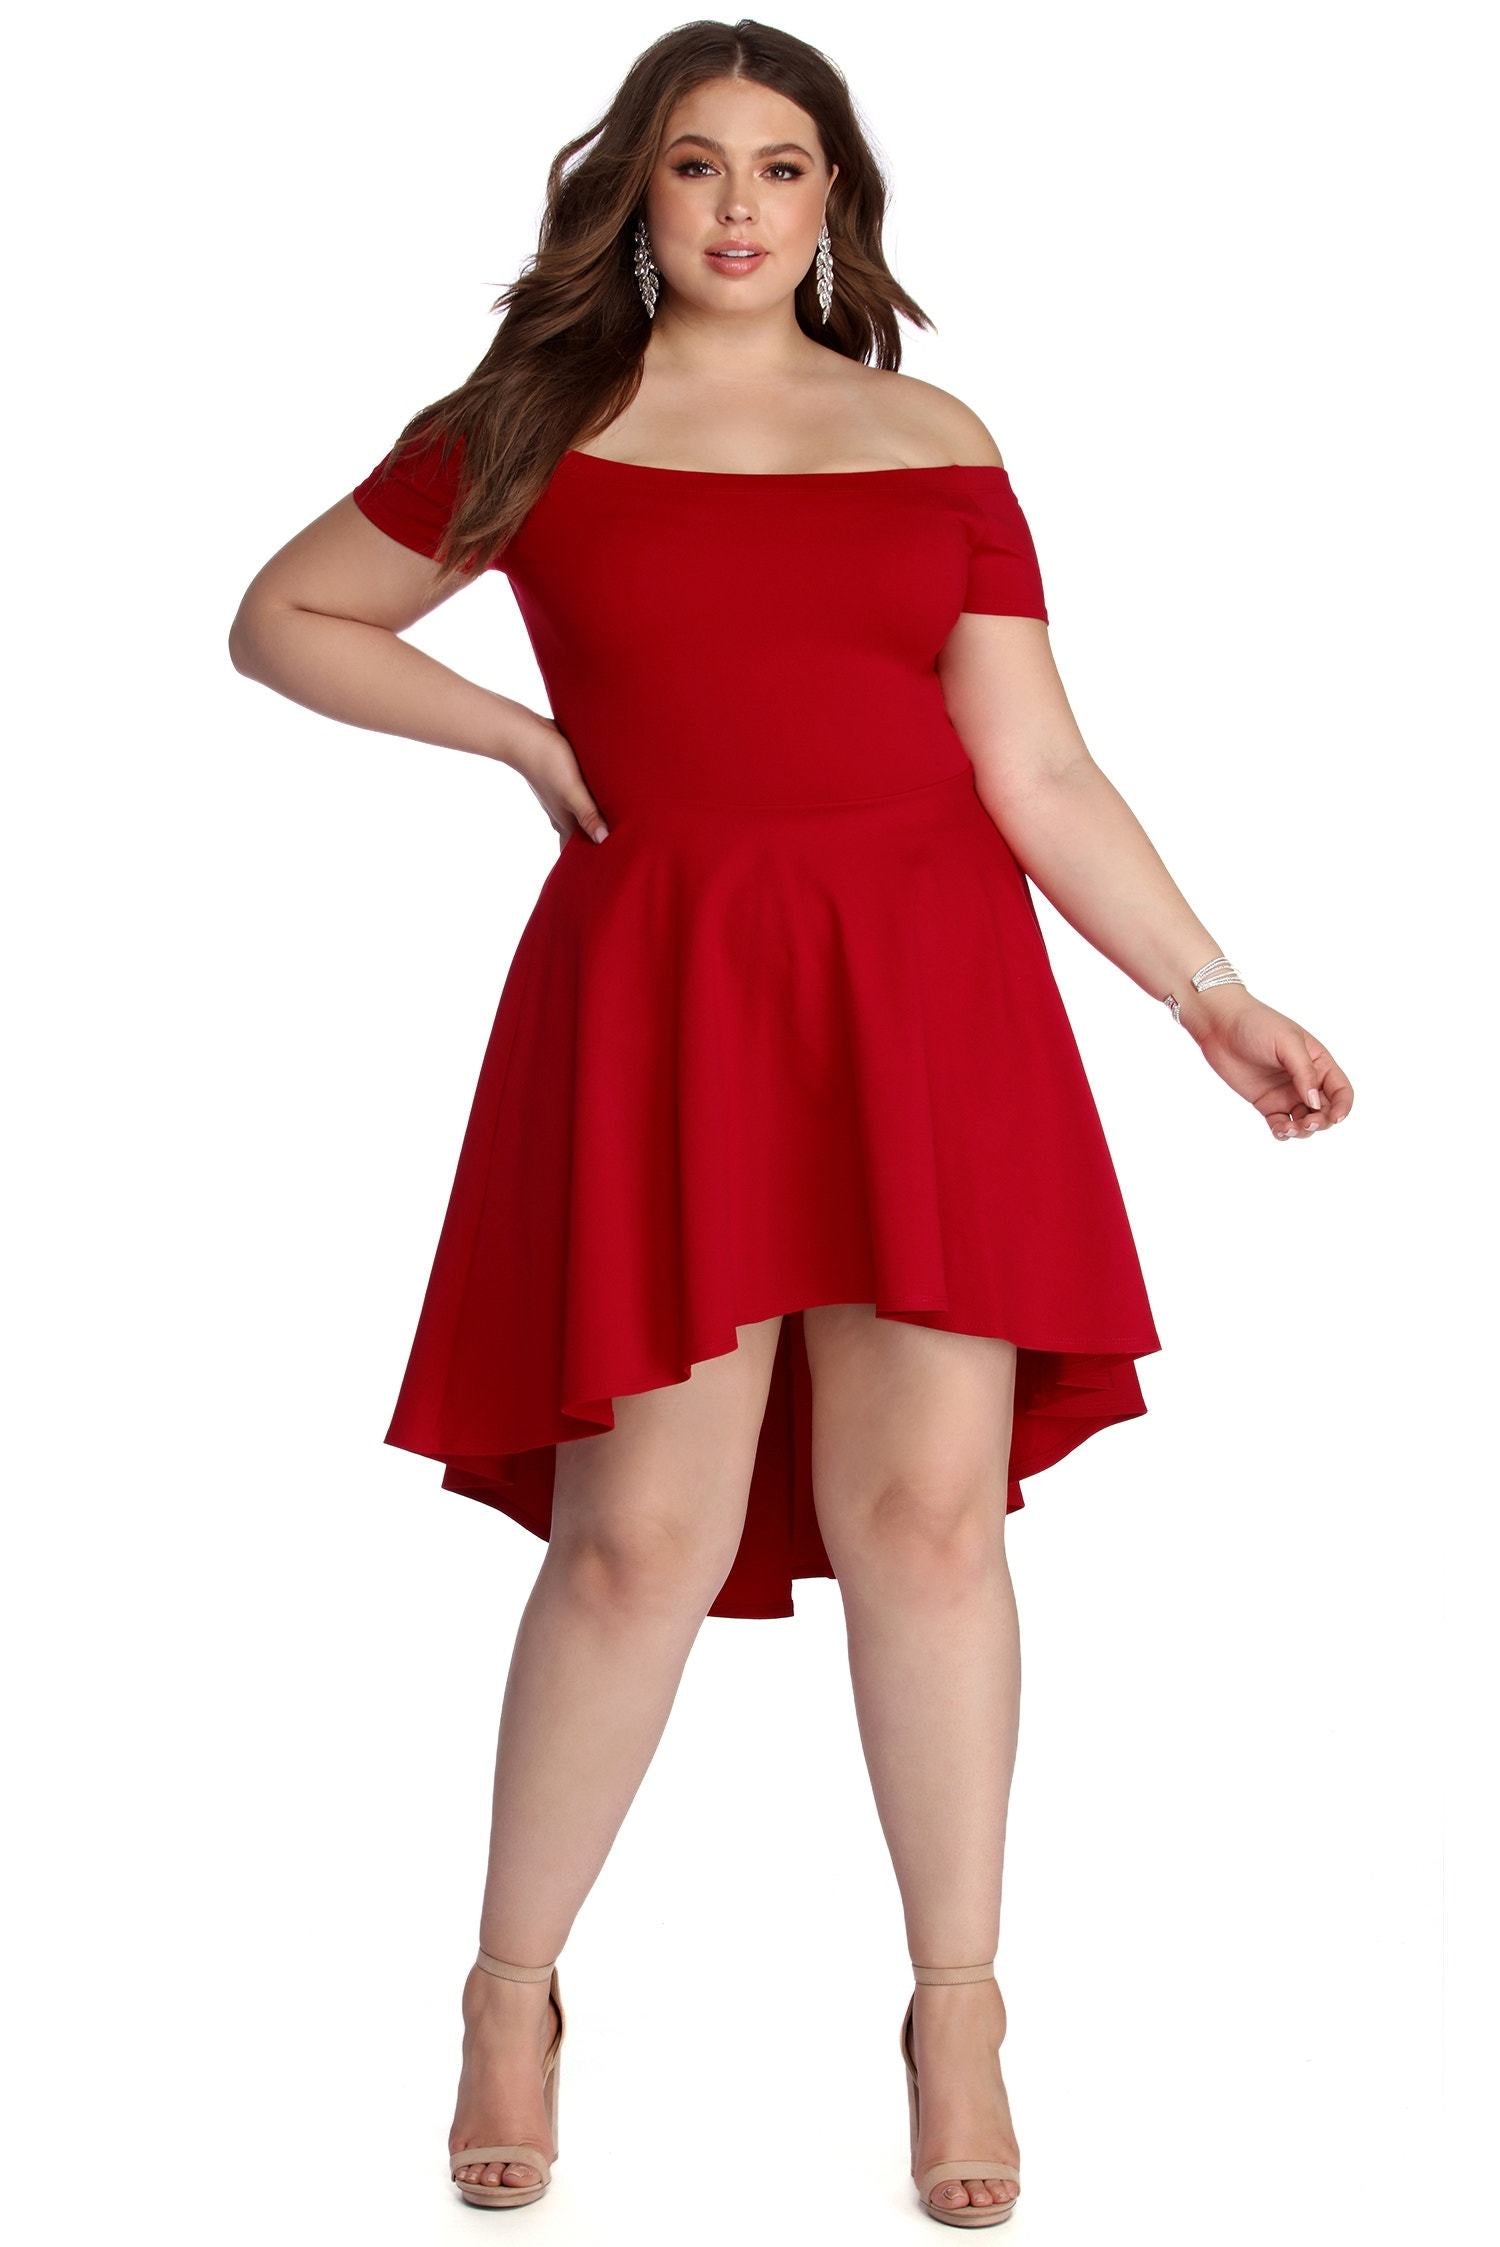 Plus All The Rage Skater Dress - Lady Occasions